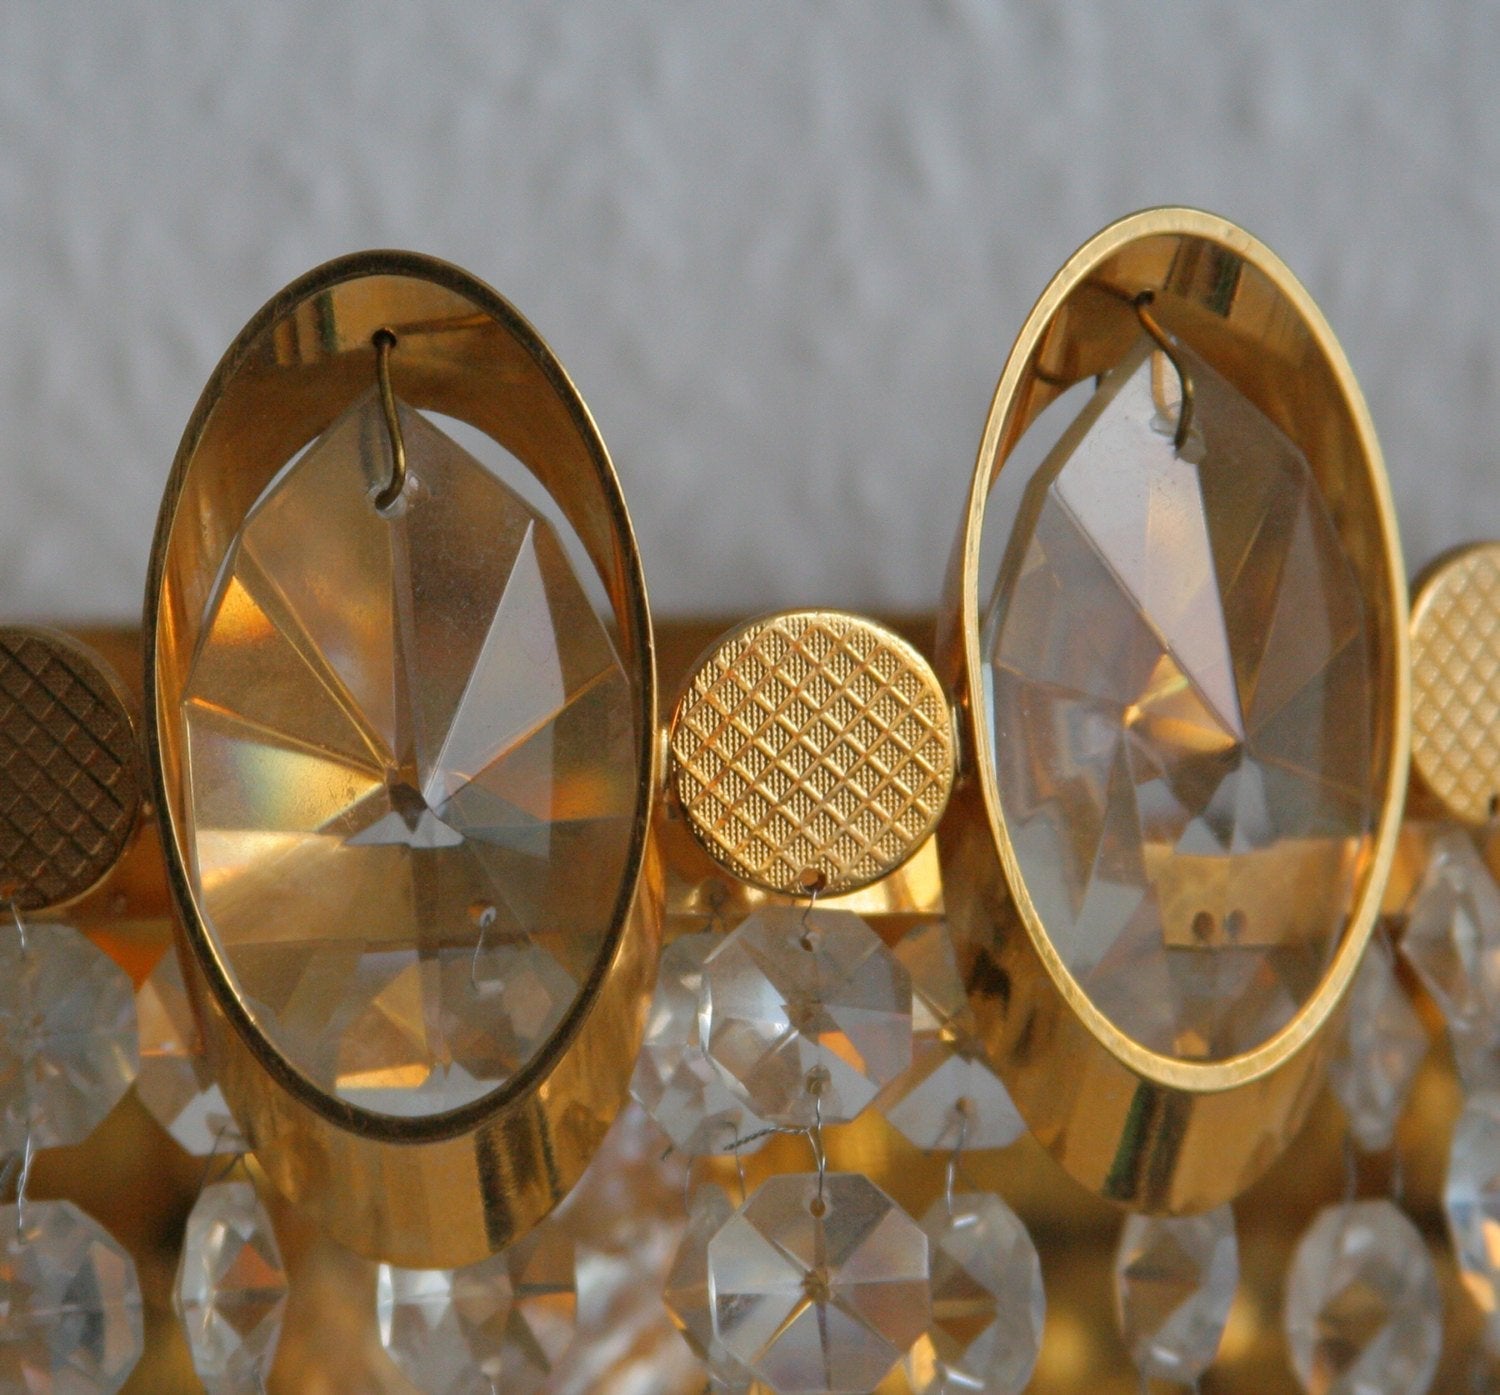 A Pair of Gold-Plated Brass Wall Sconces with Small Cut Crystal Prisms Mollaris.com 